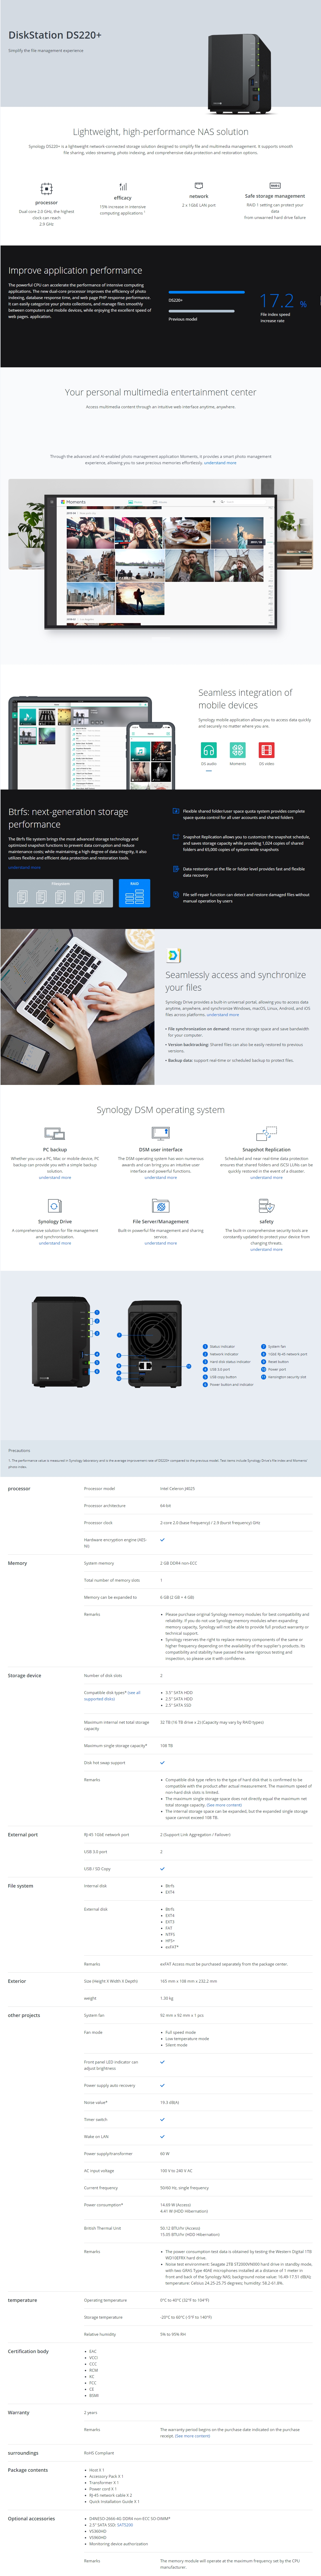 A large marketing image providing additional information about the product Synology DiskStation DS220+ Celeron Dual Core 2.0Ghz 2 Bay 2GB NAS Enclosure - Additional alt info not provided